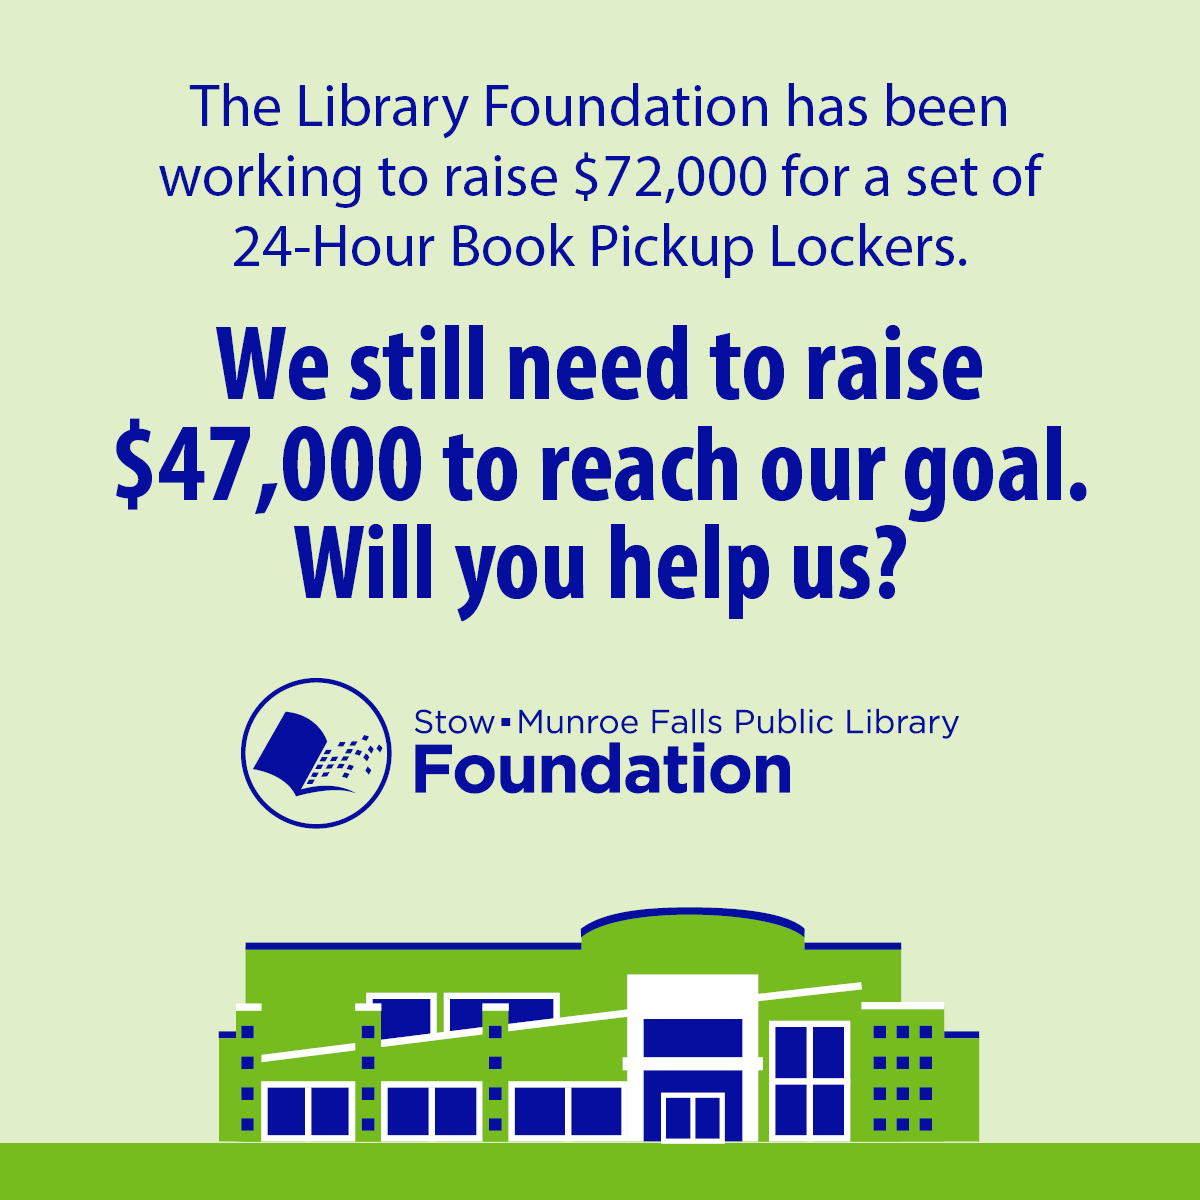 The Library Foundation has been working to raise $72,000 for a set of 24-Hour Book Pickup Lockers. We still need to raise $47,000 to reach our goal. Will you help us?